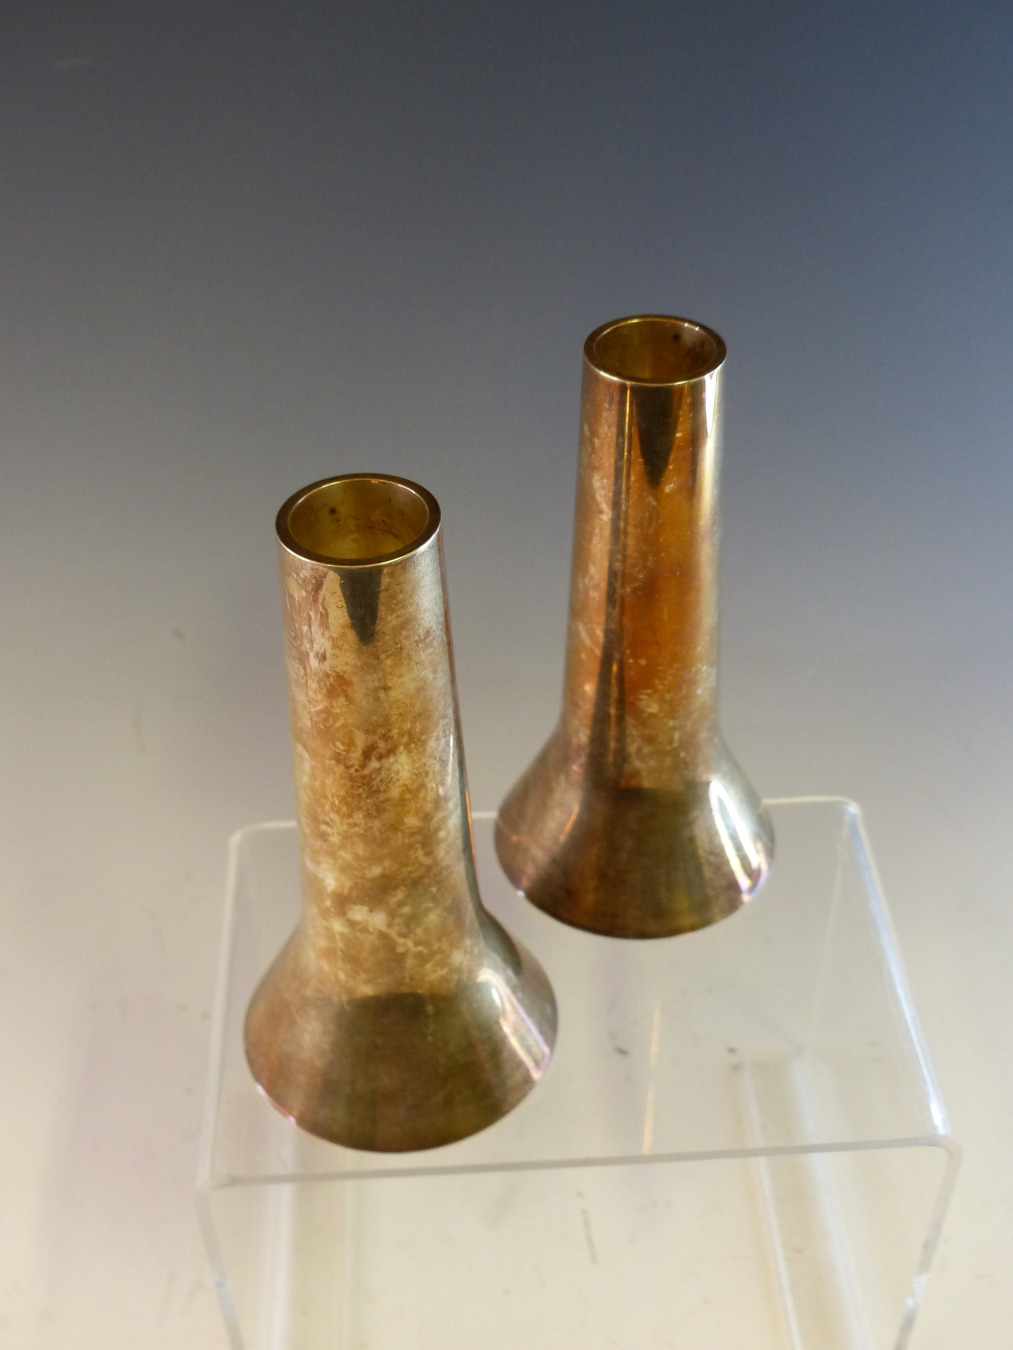 A PAIR OF GEORG JENSEN STERLING SILVER 1140 CANDLESTICKS FLARING FROM THE NOZZLES TO THE FOOT - Image 2 of 4